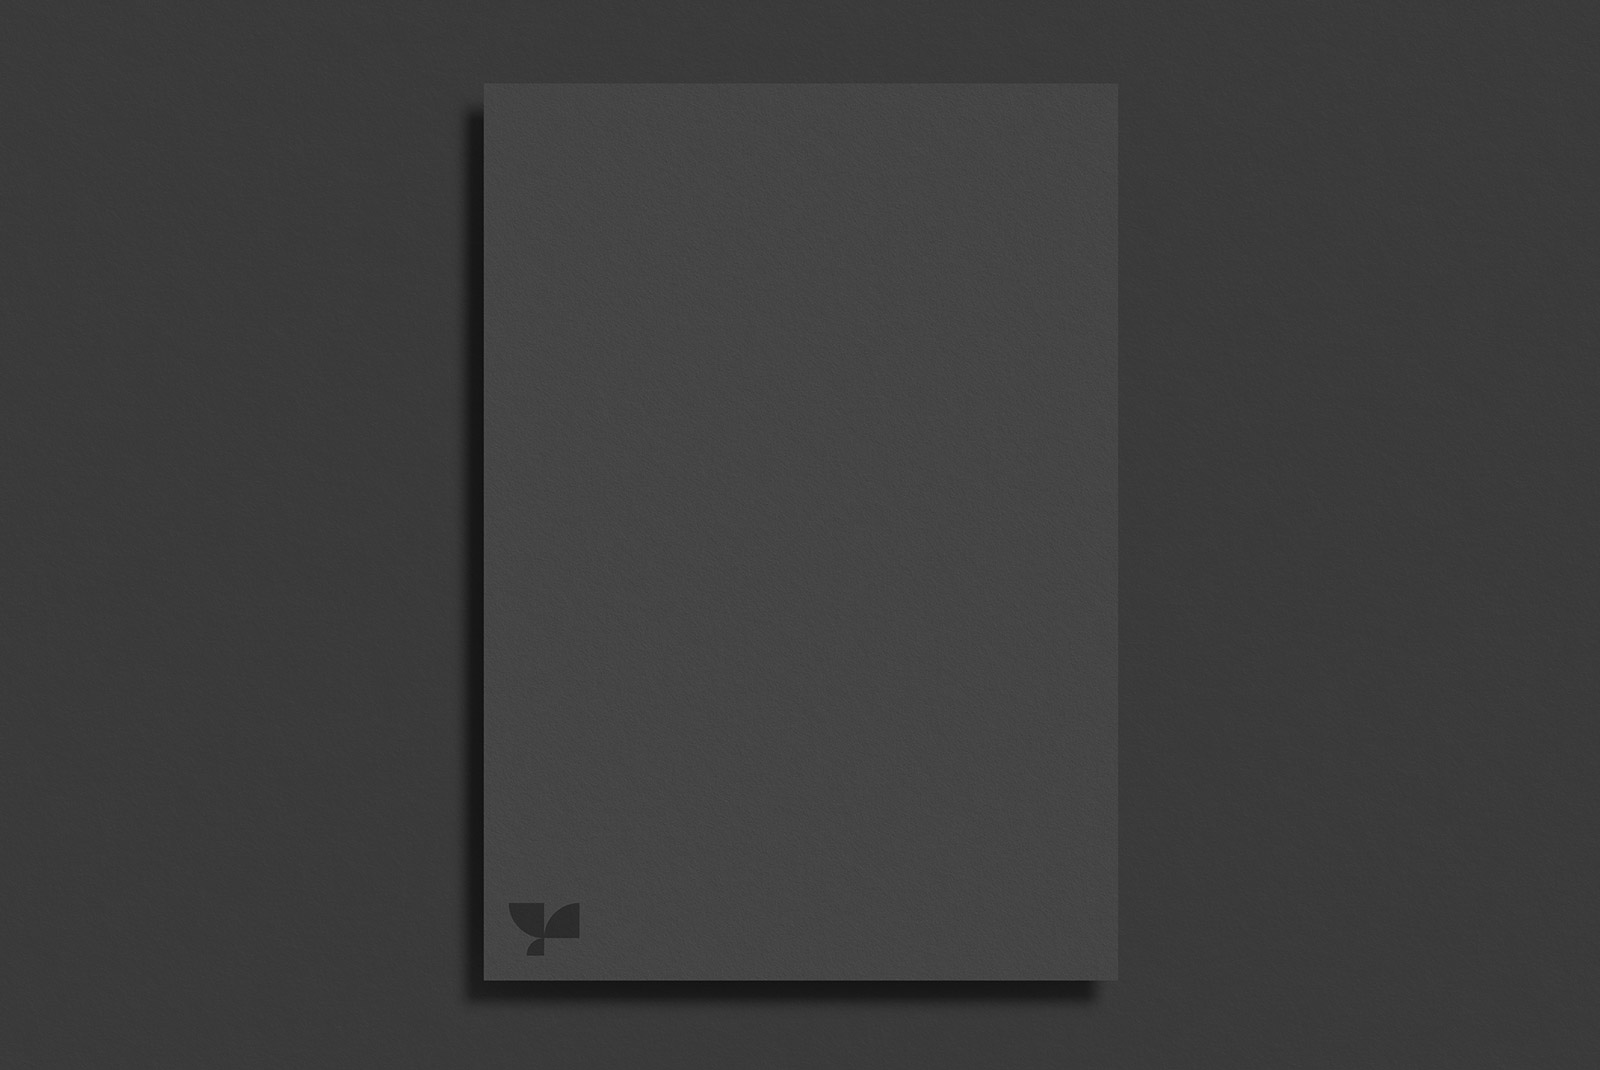 Elegant black paper brochure mockup on a dark surface, ideal for showcasing graphic design and typography work for designers.